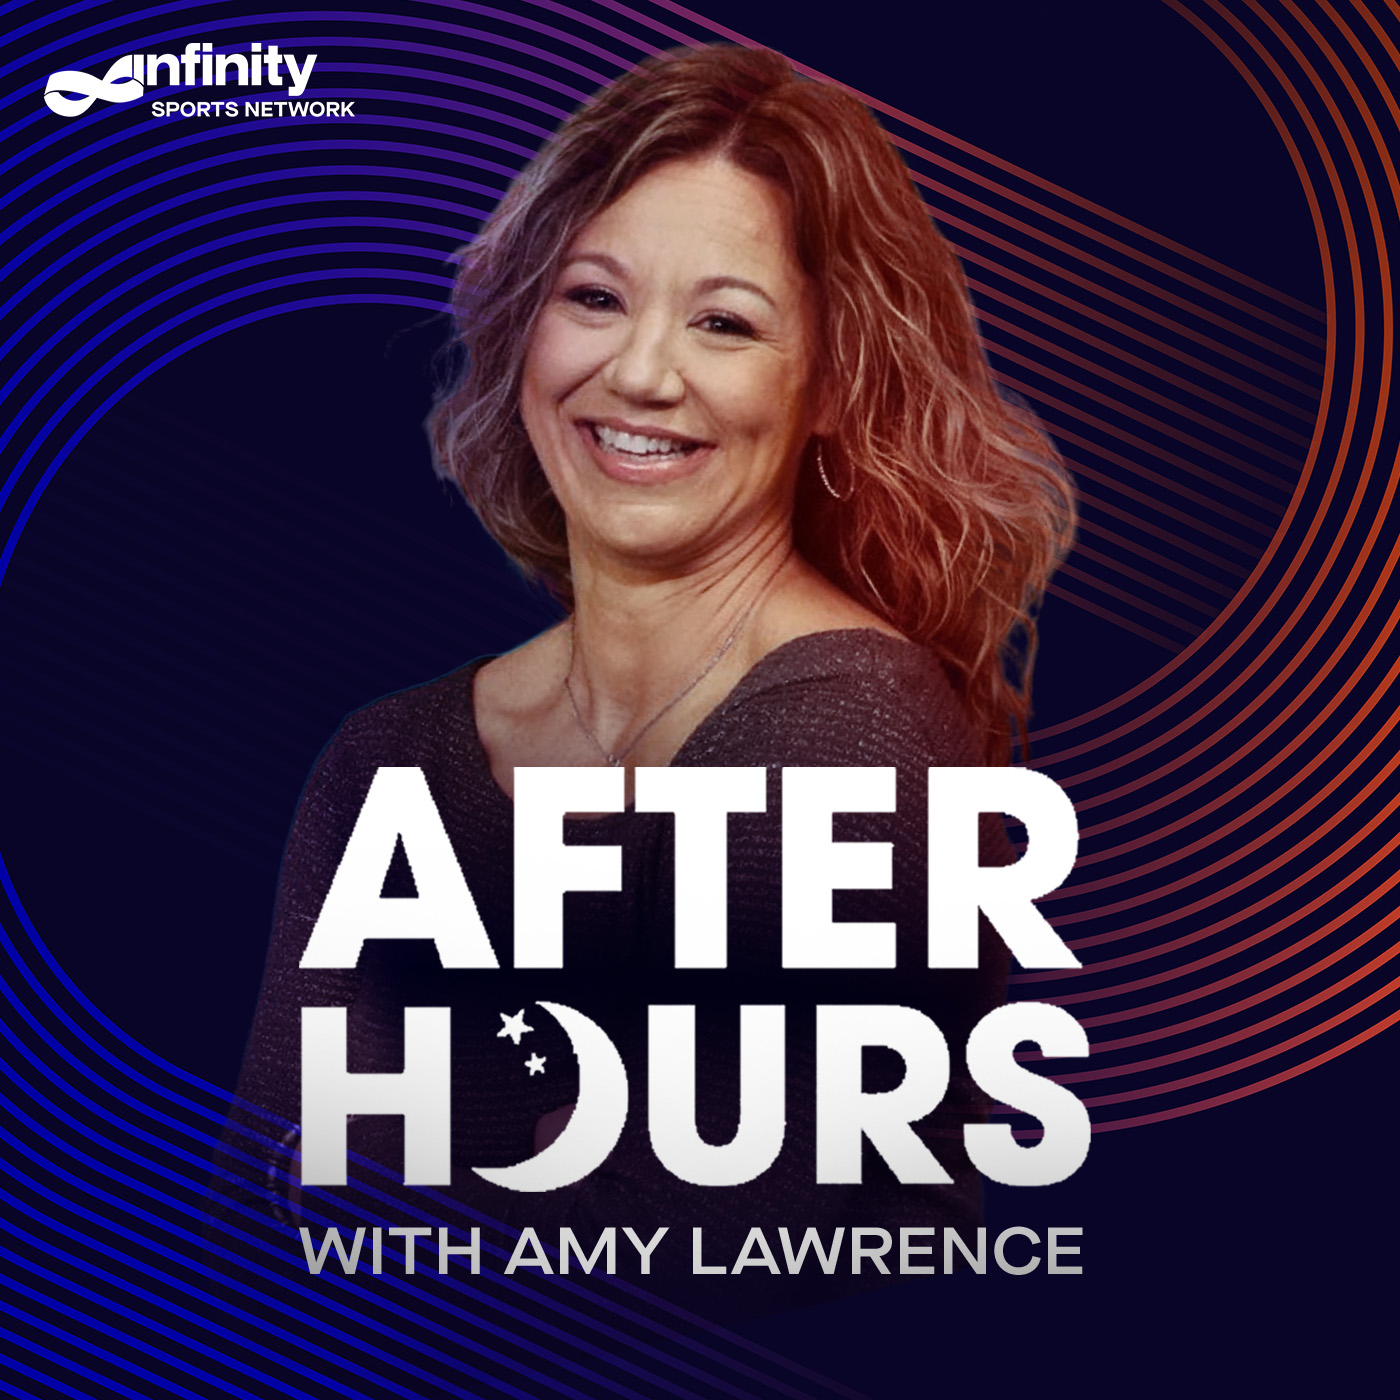 11-29-21 After Hours with Amy Lawrence PODCAST: Hour 2